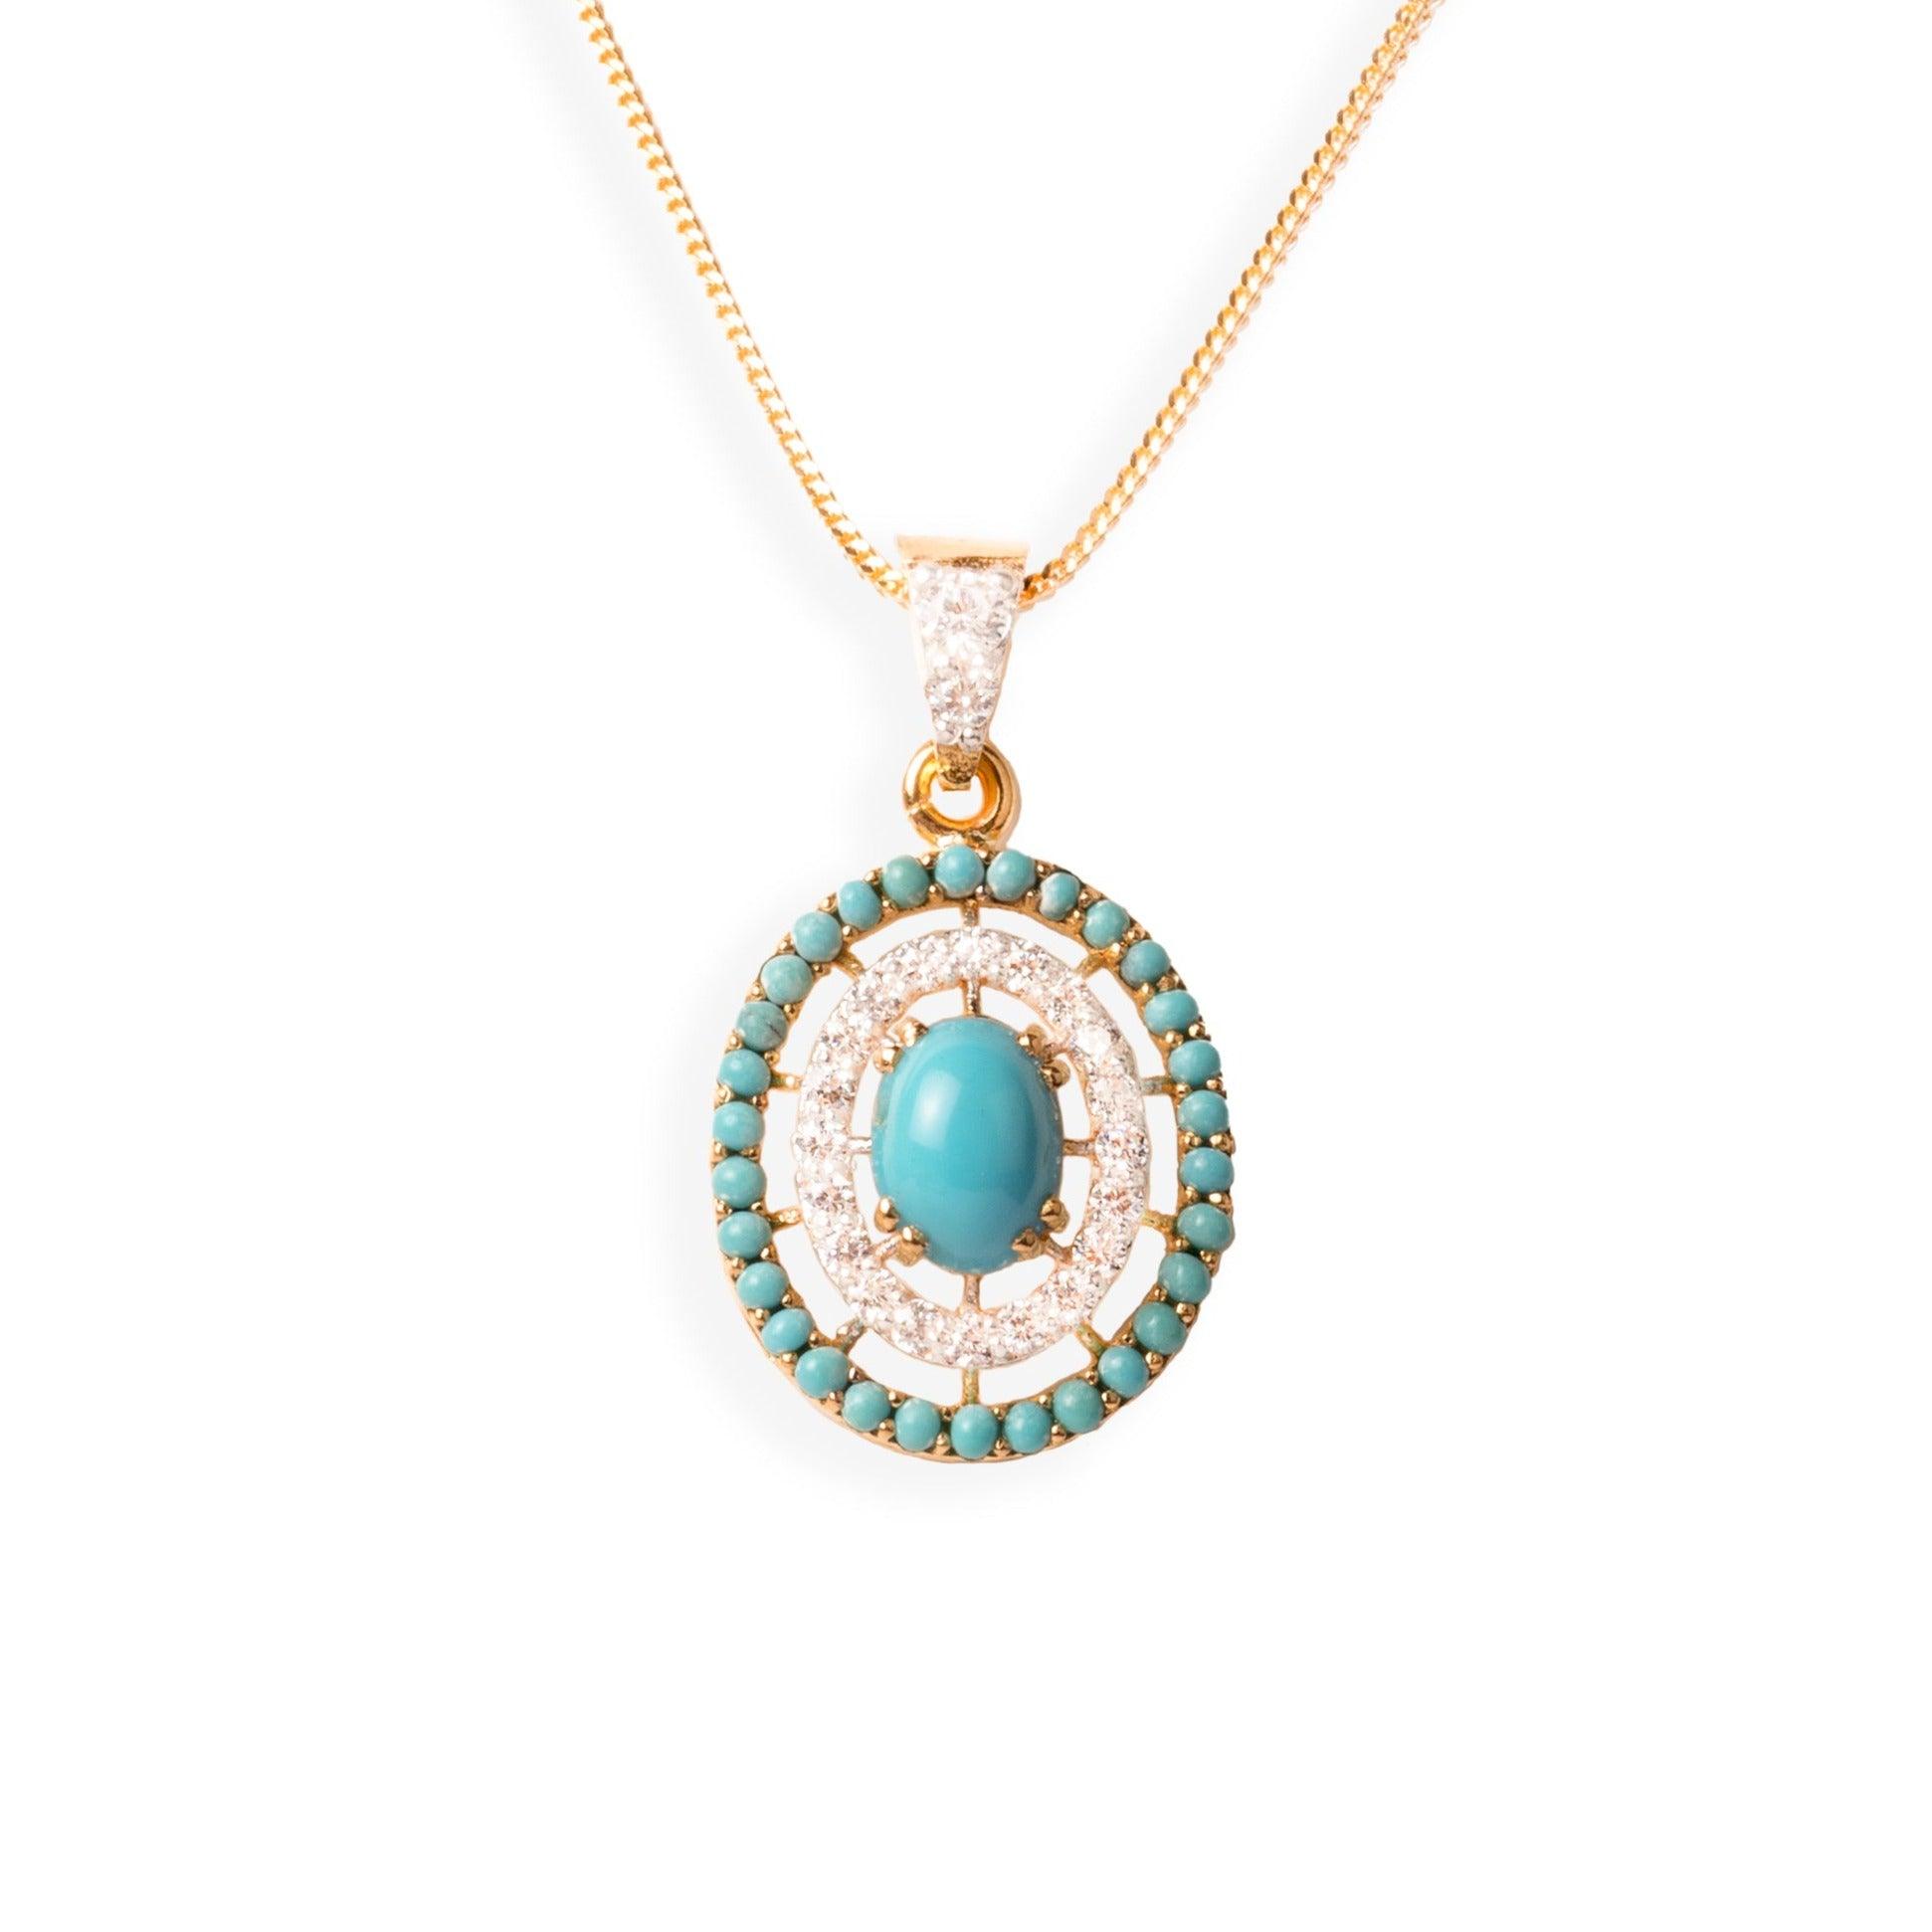 22ct Gold Cubic Zirconia and Turquoise Chain, Pendant and Earrings Set C-5779 P-7301 E-7301 - Minar Jewellers